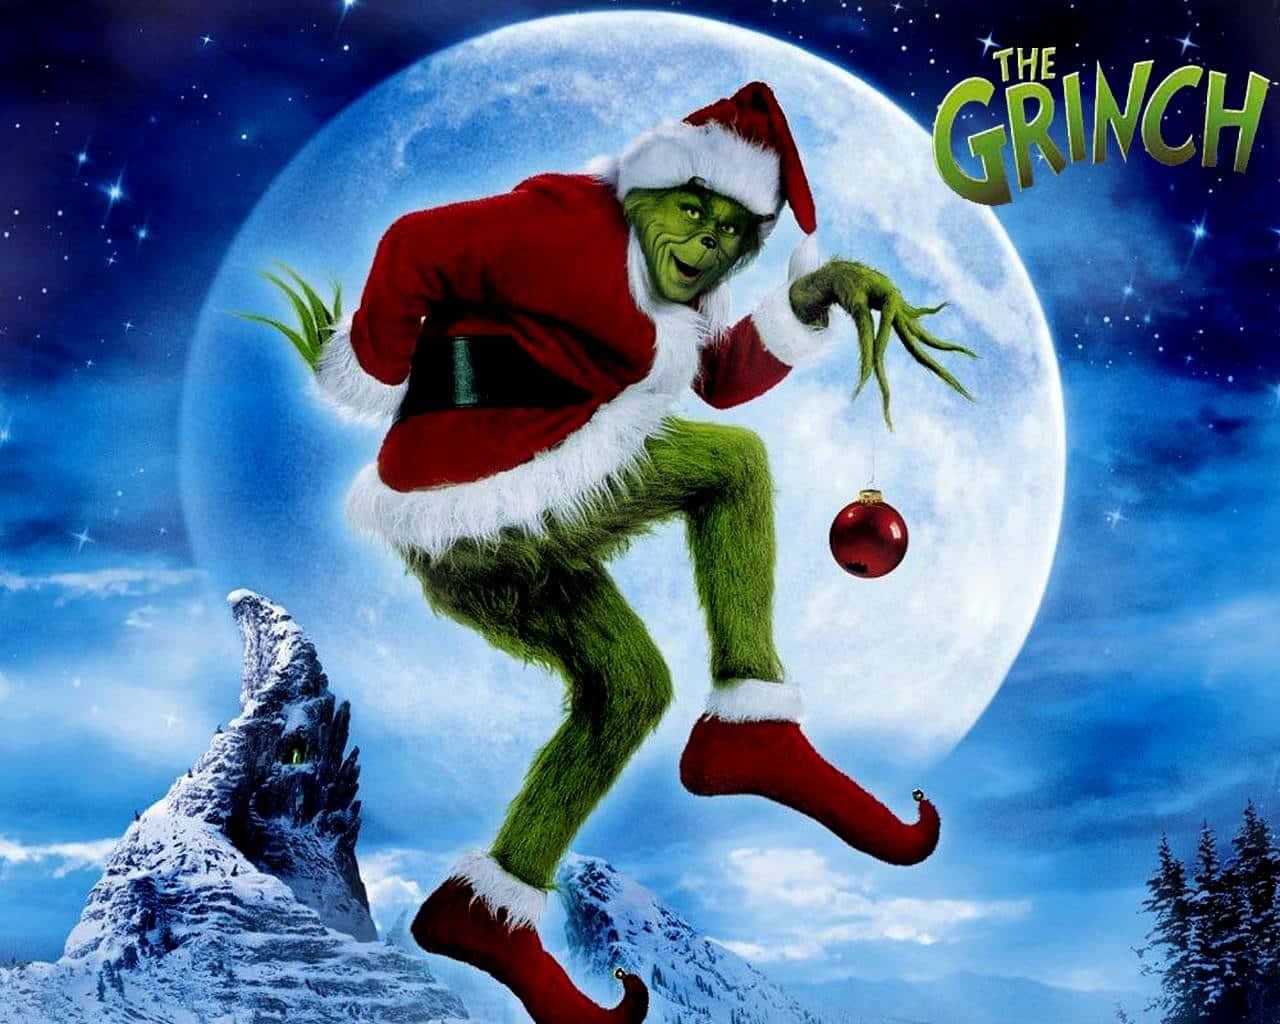 Get Into The Christmas Spirit With The Grinch